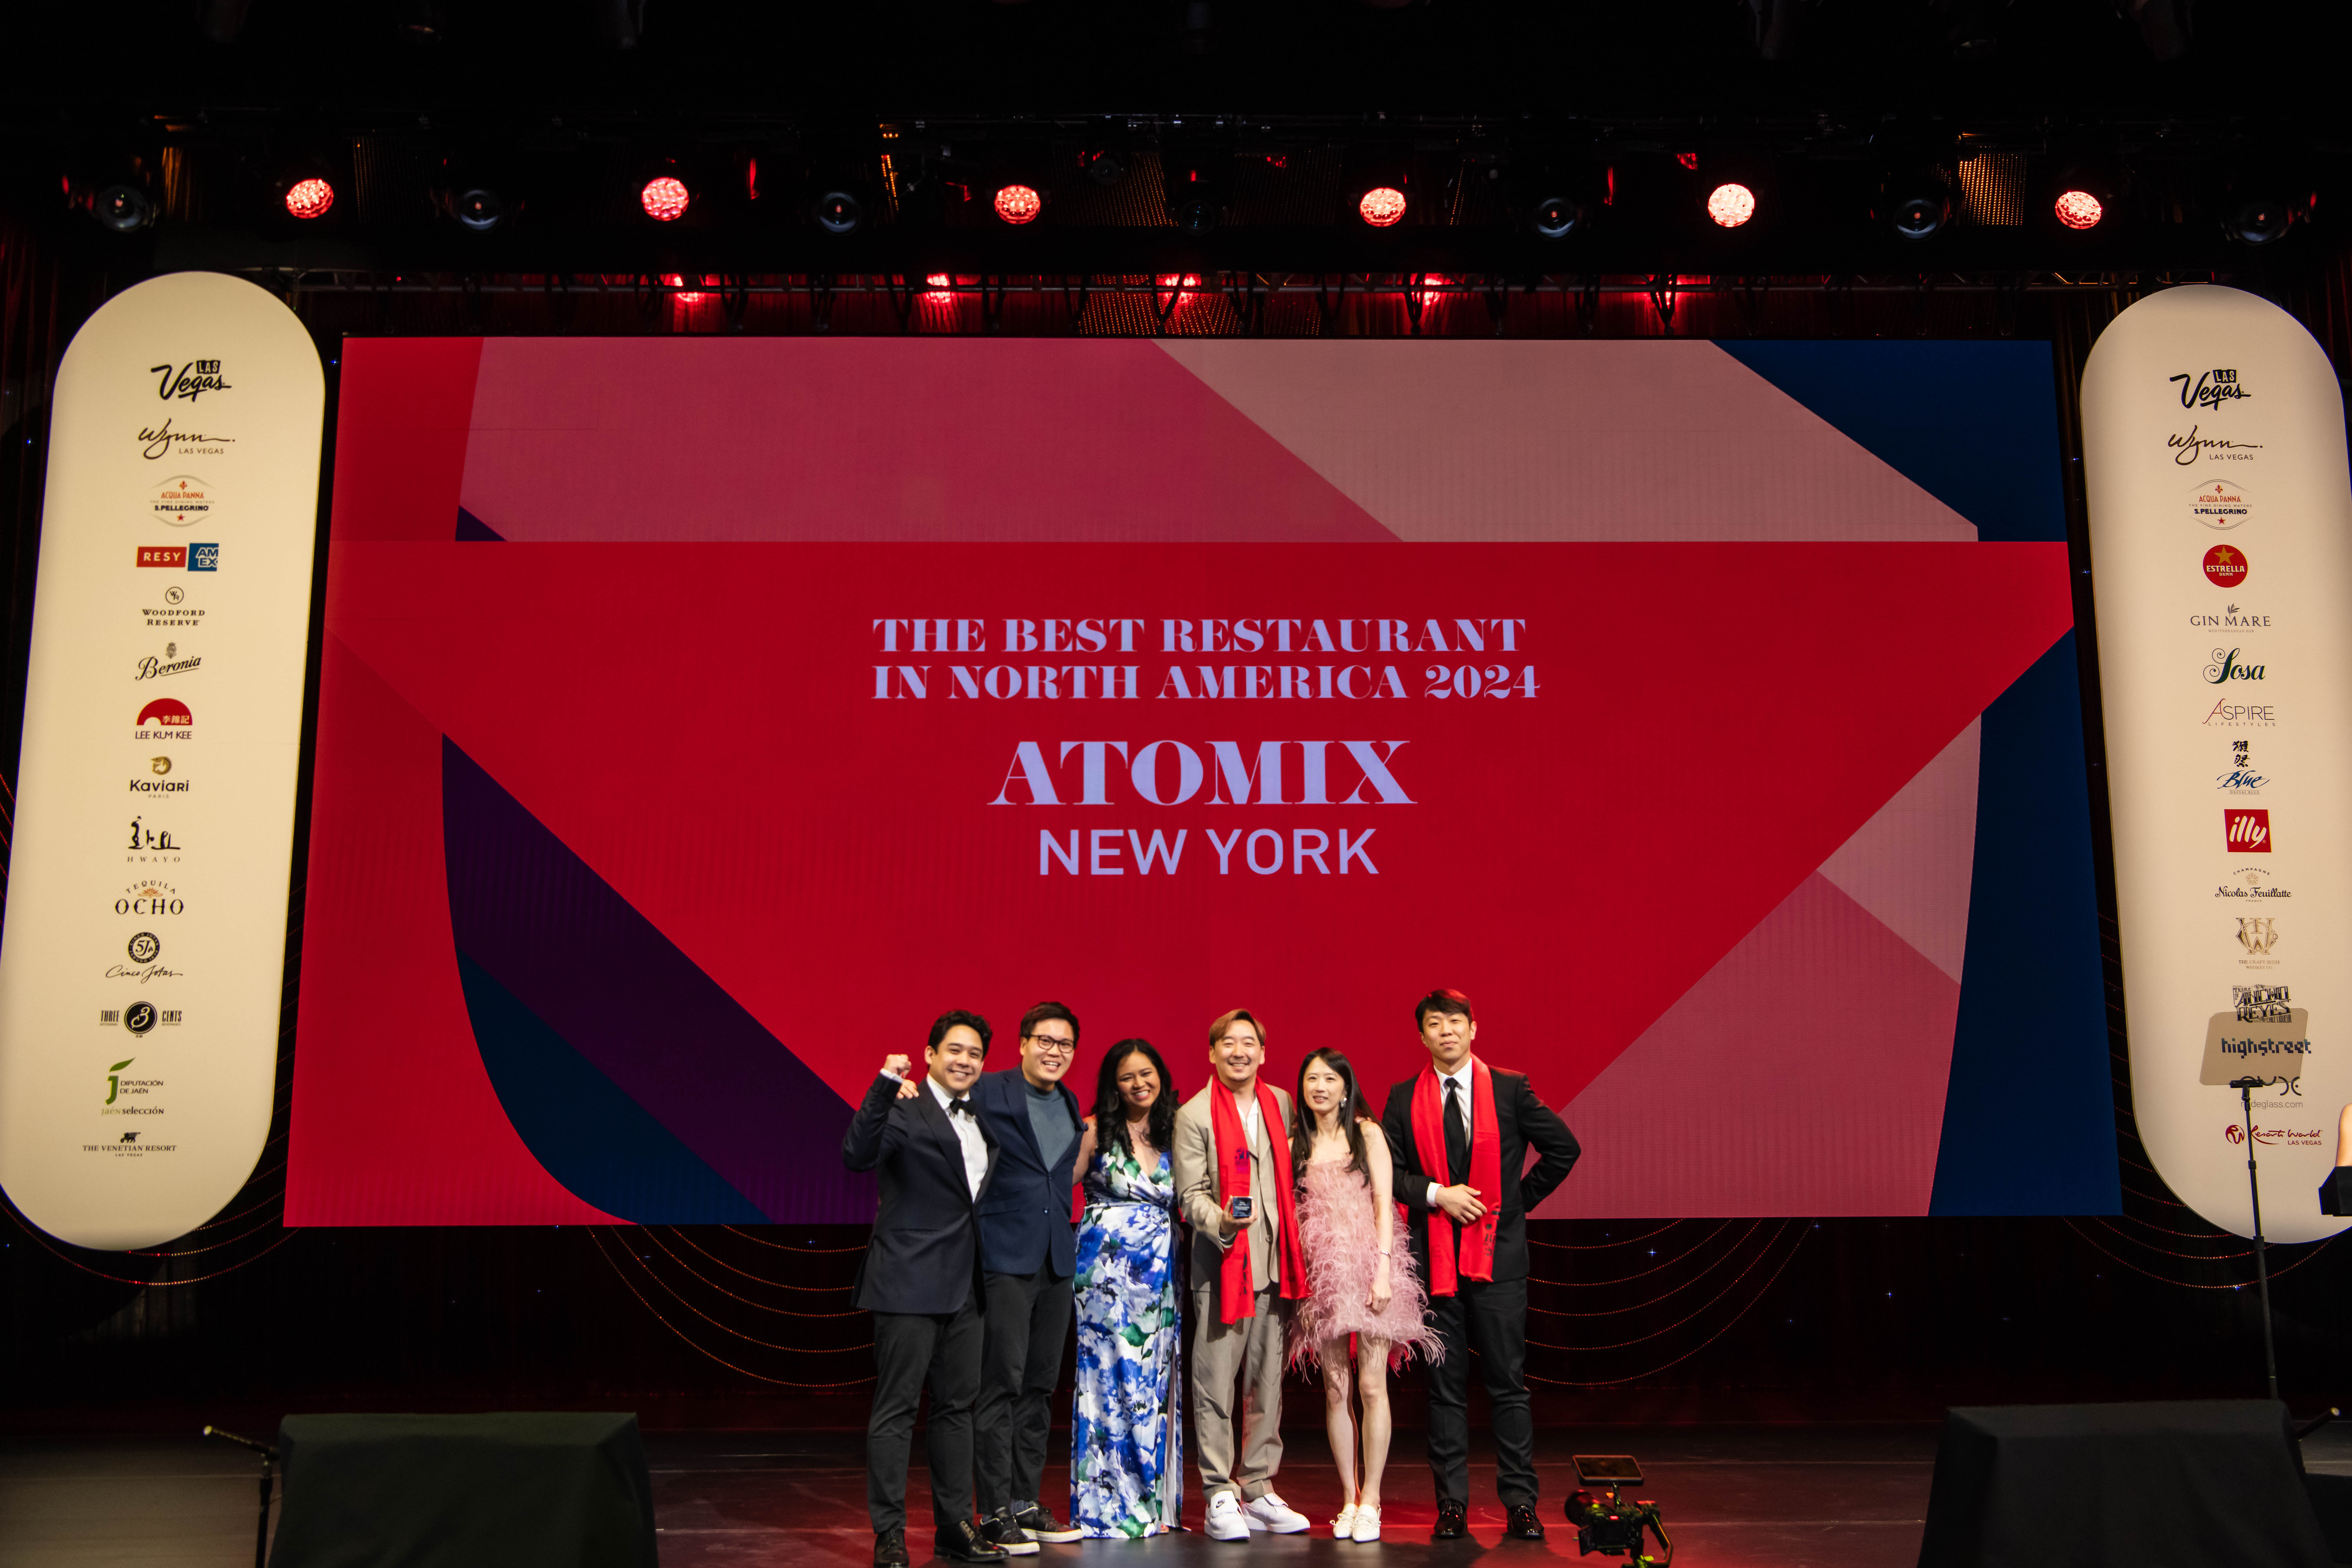 It’s Official: Atomix Is Still North America’s Top Restaurant